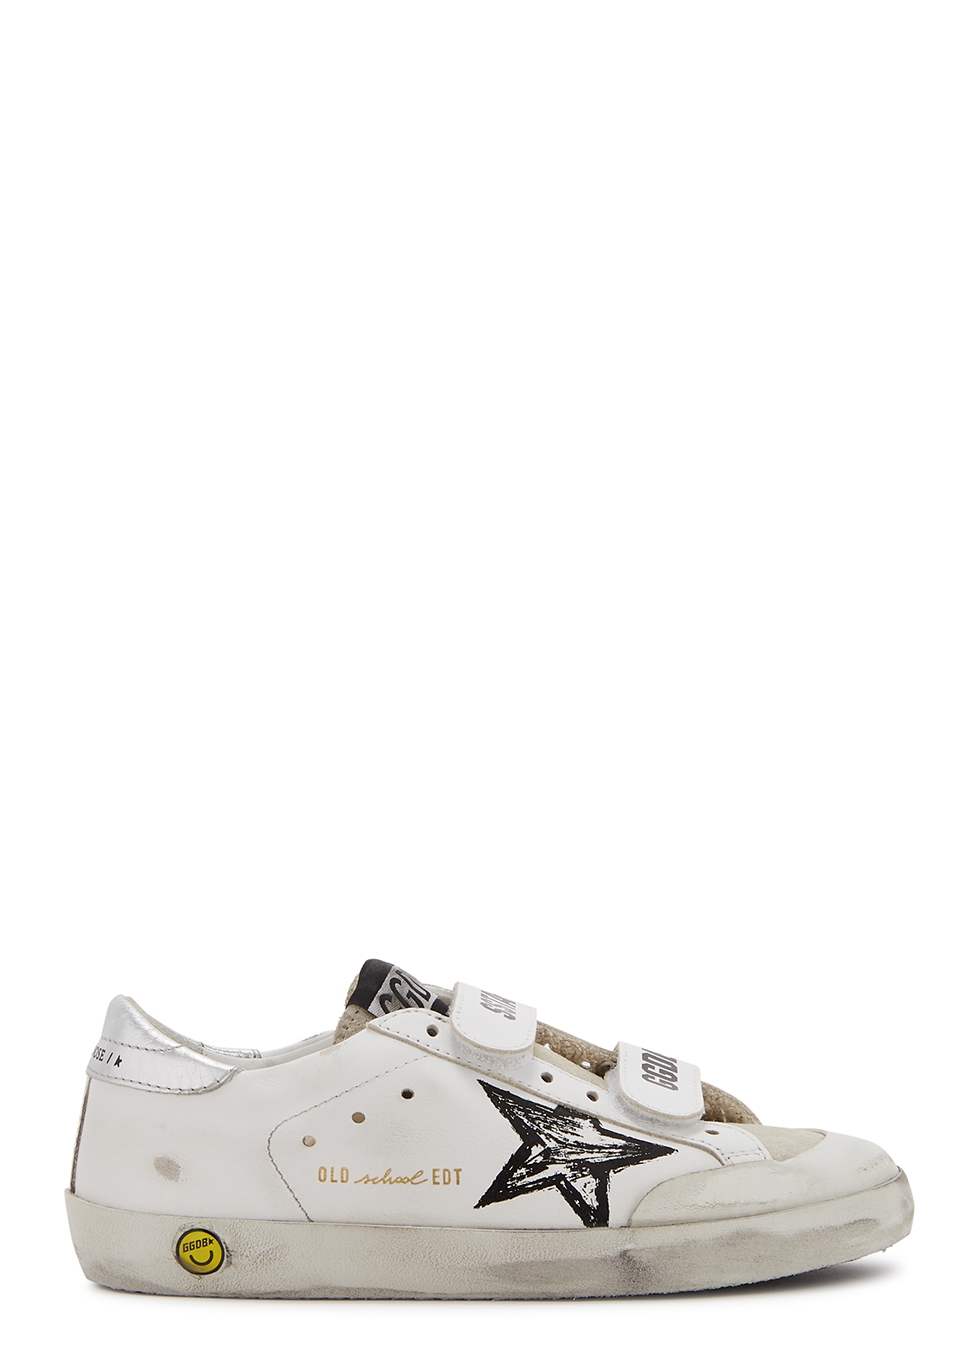 Harvey Nichols Shoes Flat Shoes School Shoes IT28-IT35 Old School white distressed leather sneakers 